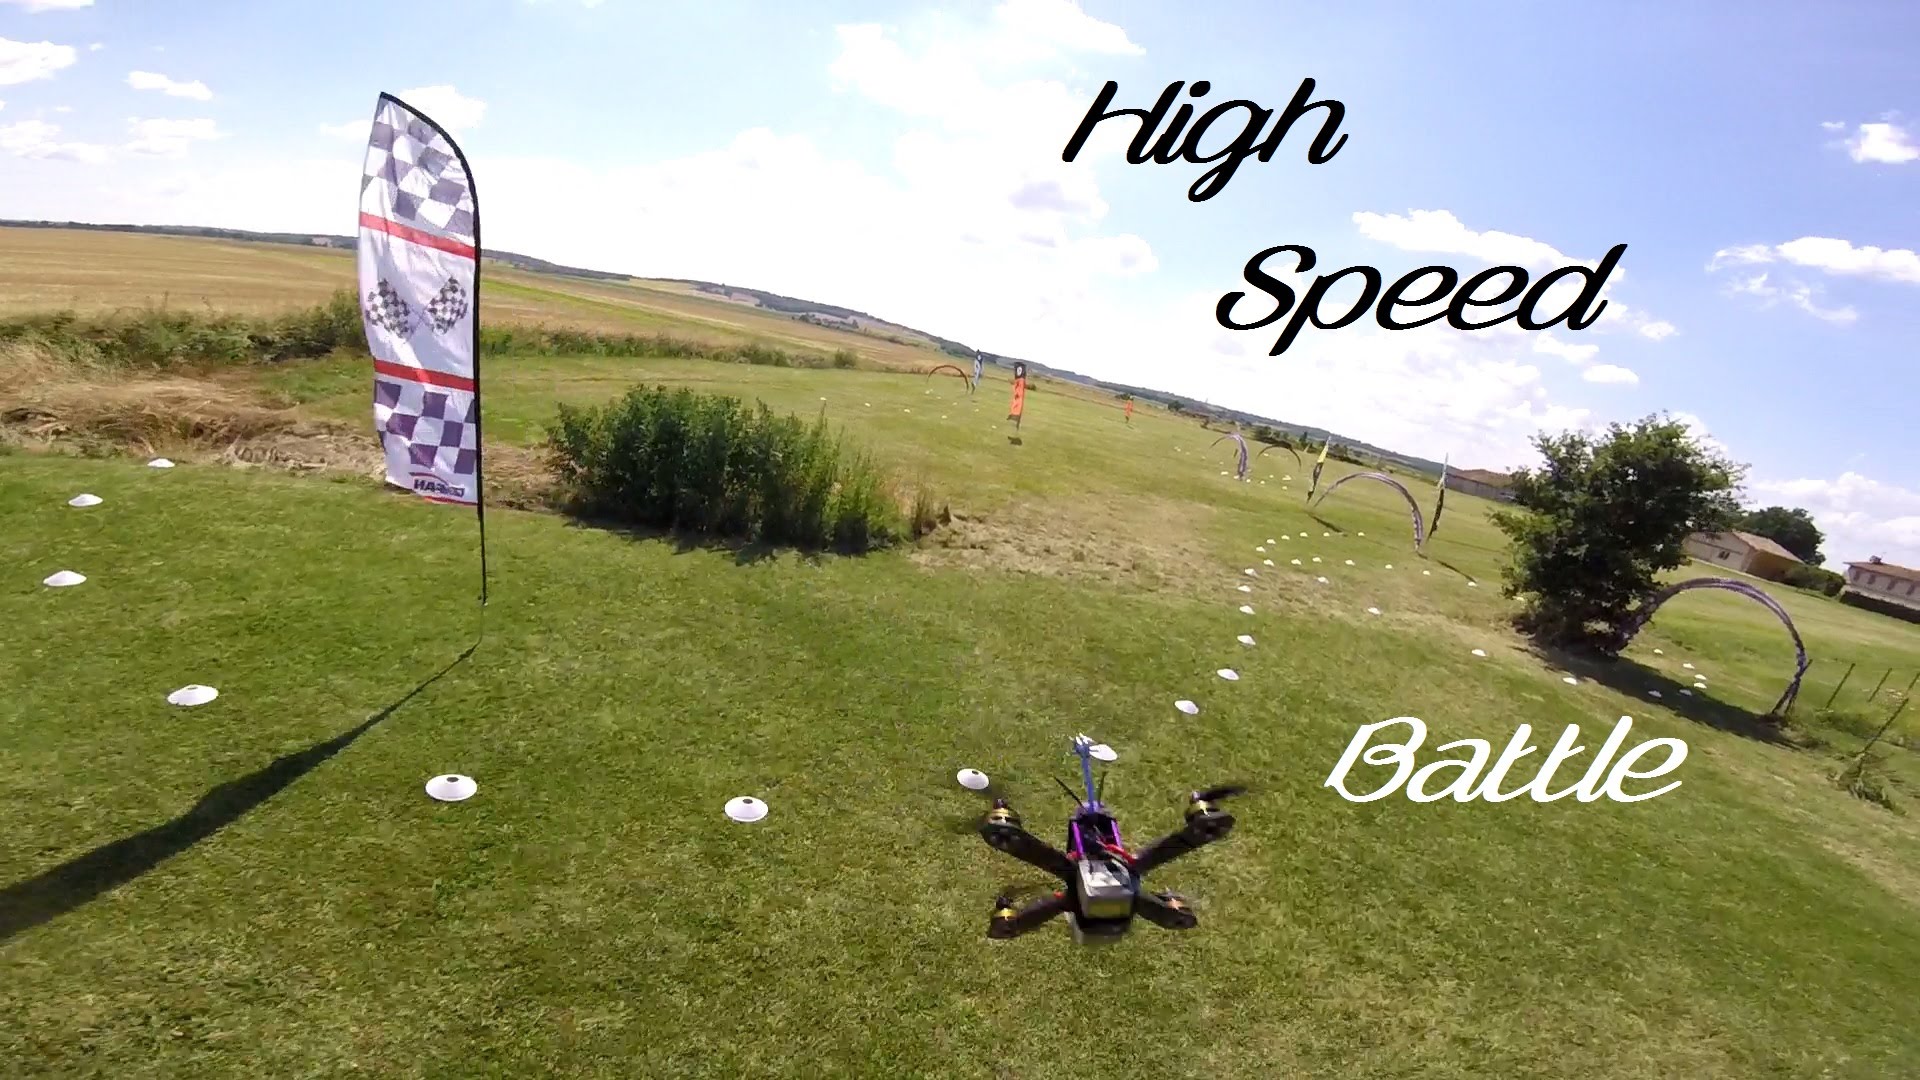 High Speed Battle at FPV AIR RACE Drone Racing